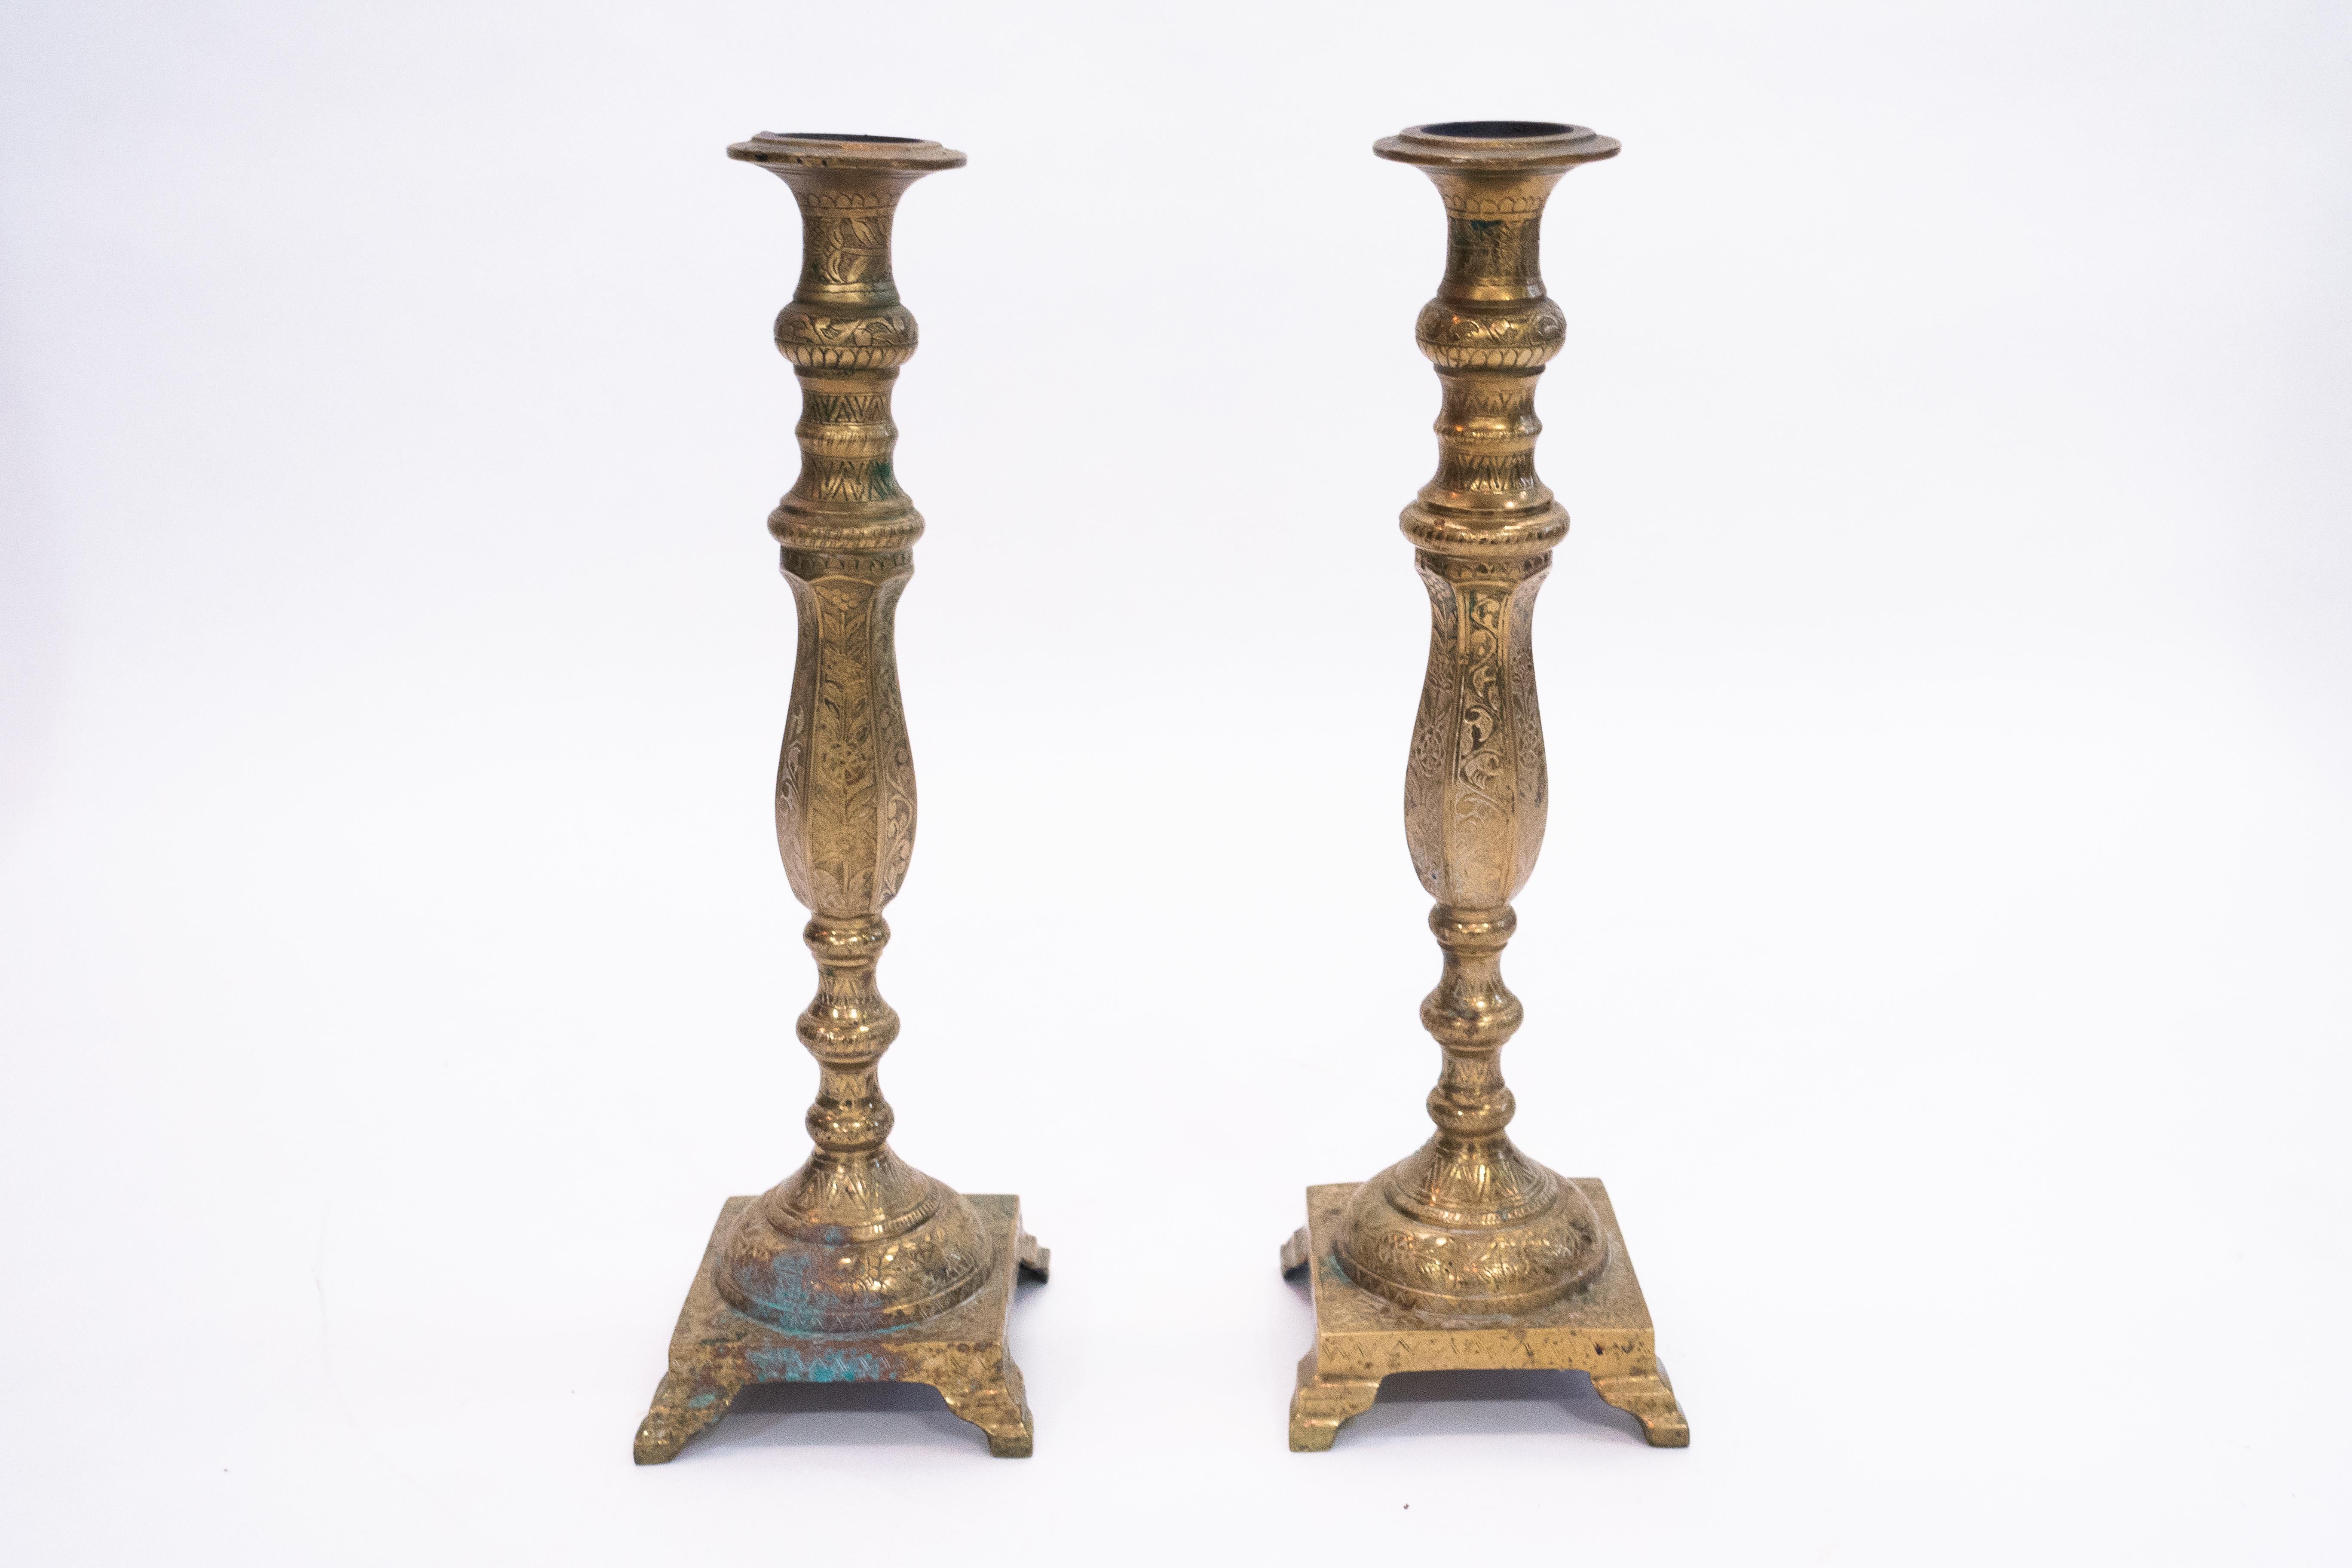 Pair of tall Moroccan brass candlesticks from the 1950s decorated in very detailed arabesque floral and geometric design.